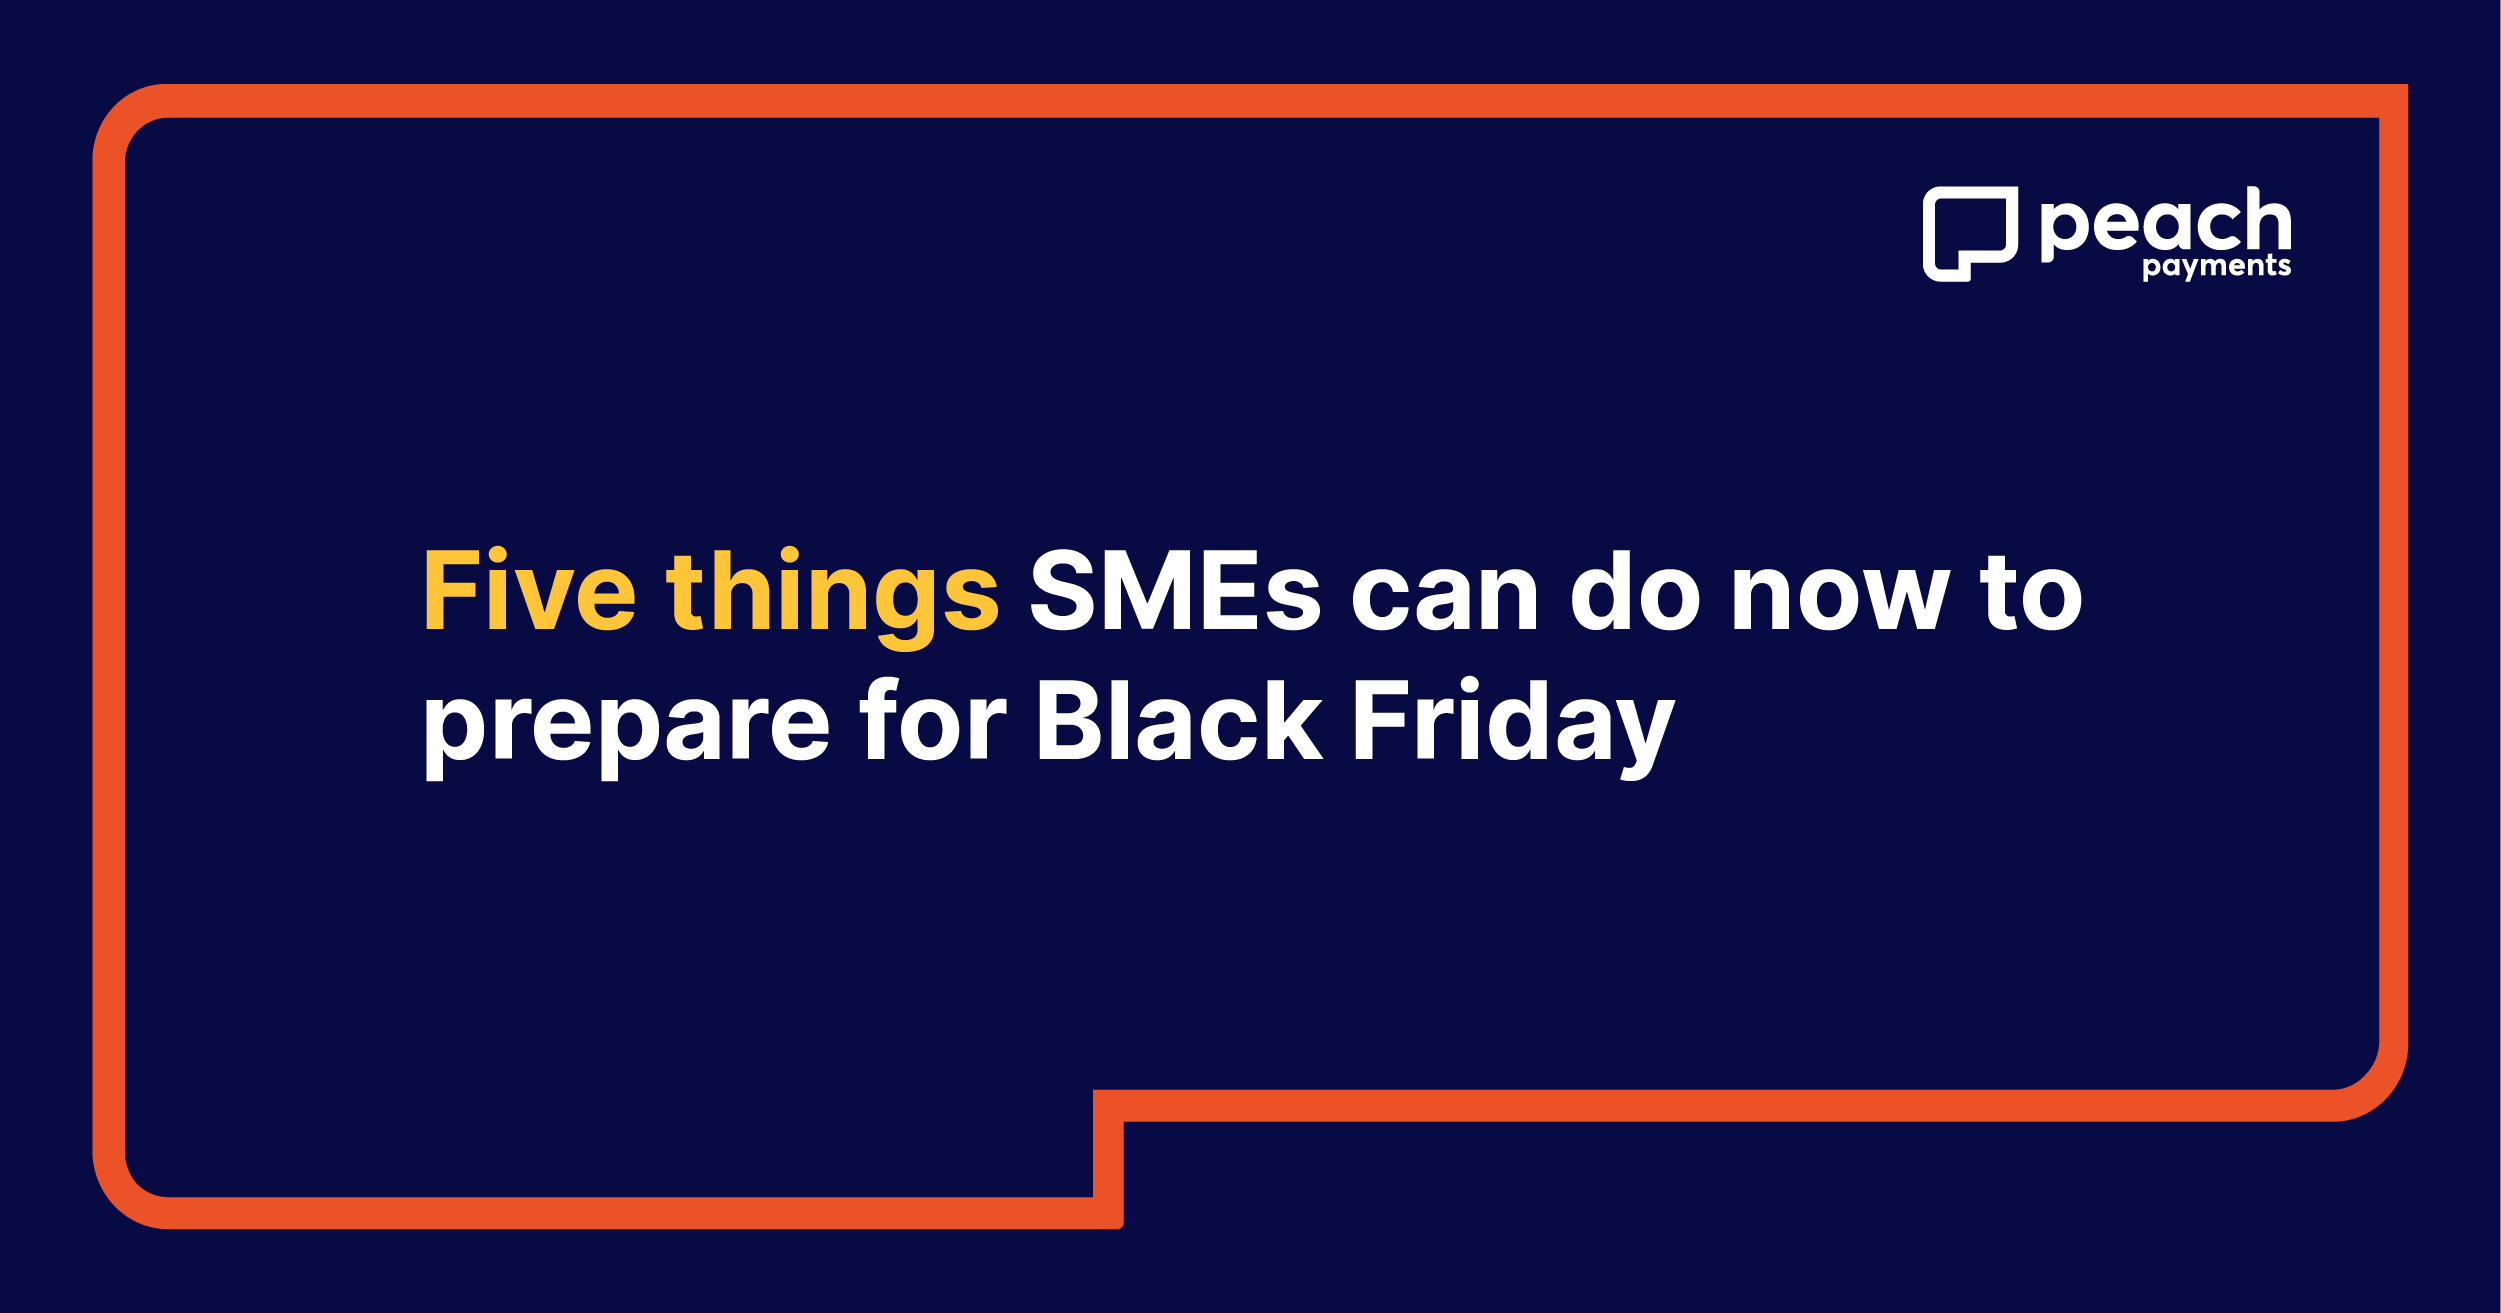 Five things SMEs can do now to prepare for Black Friday